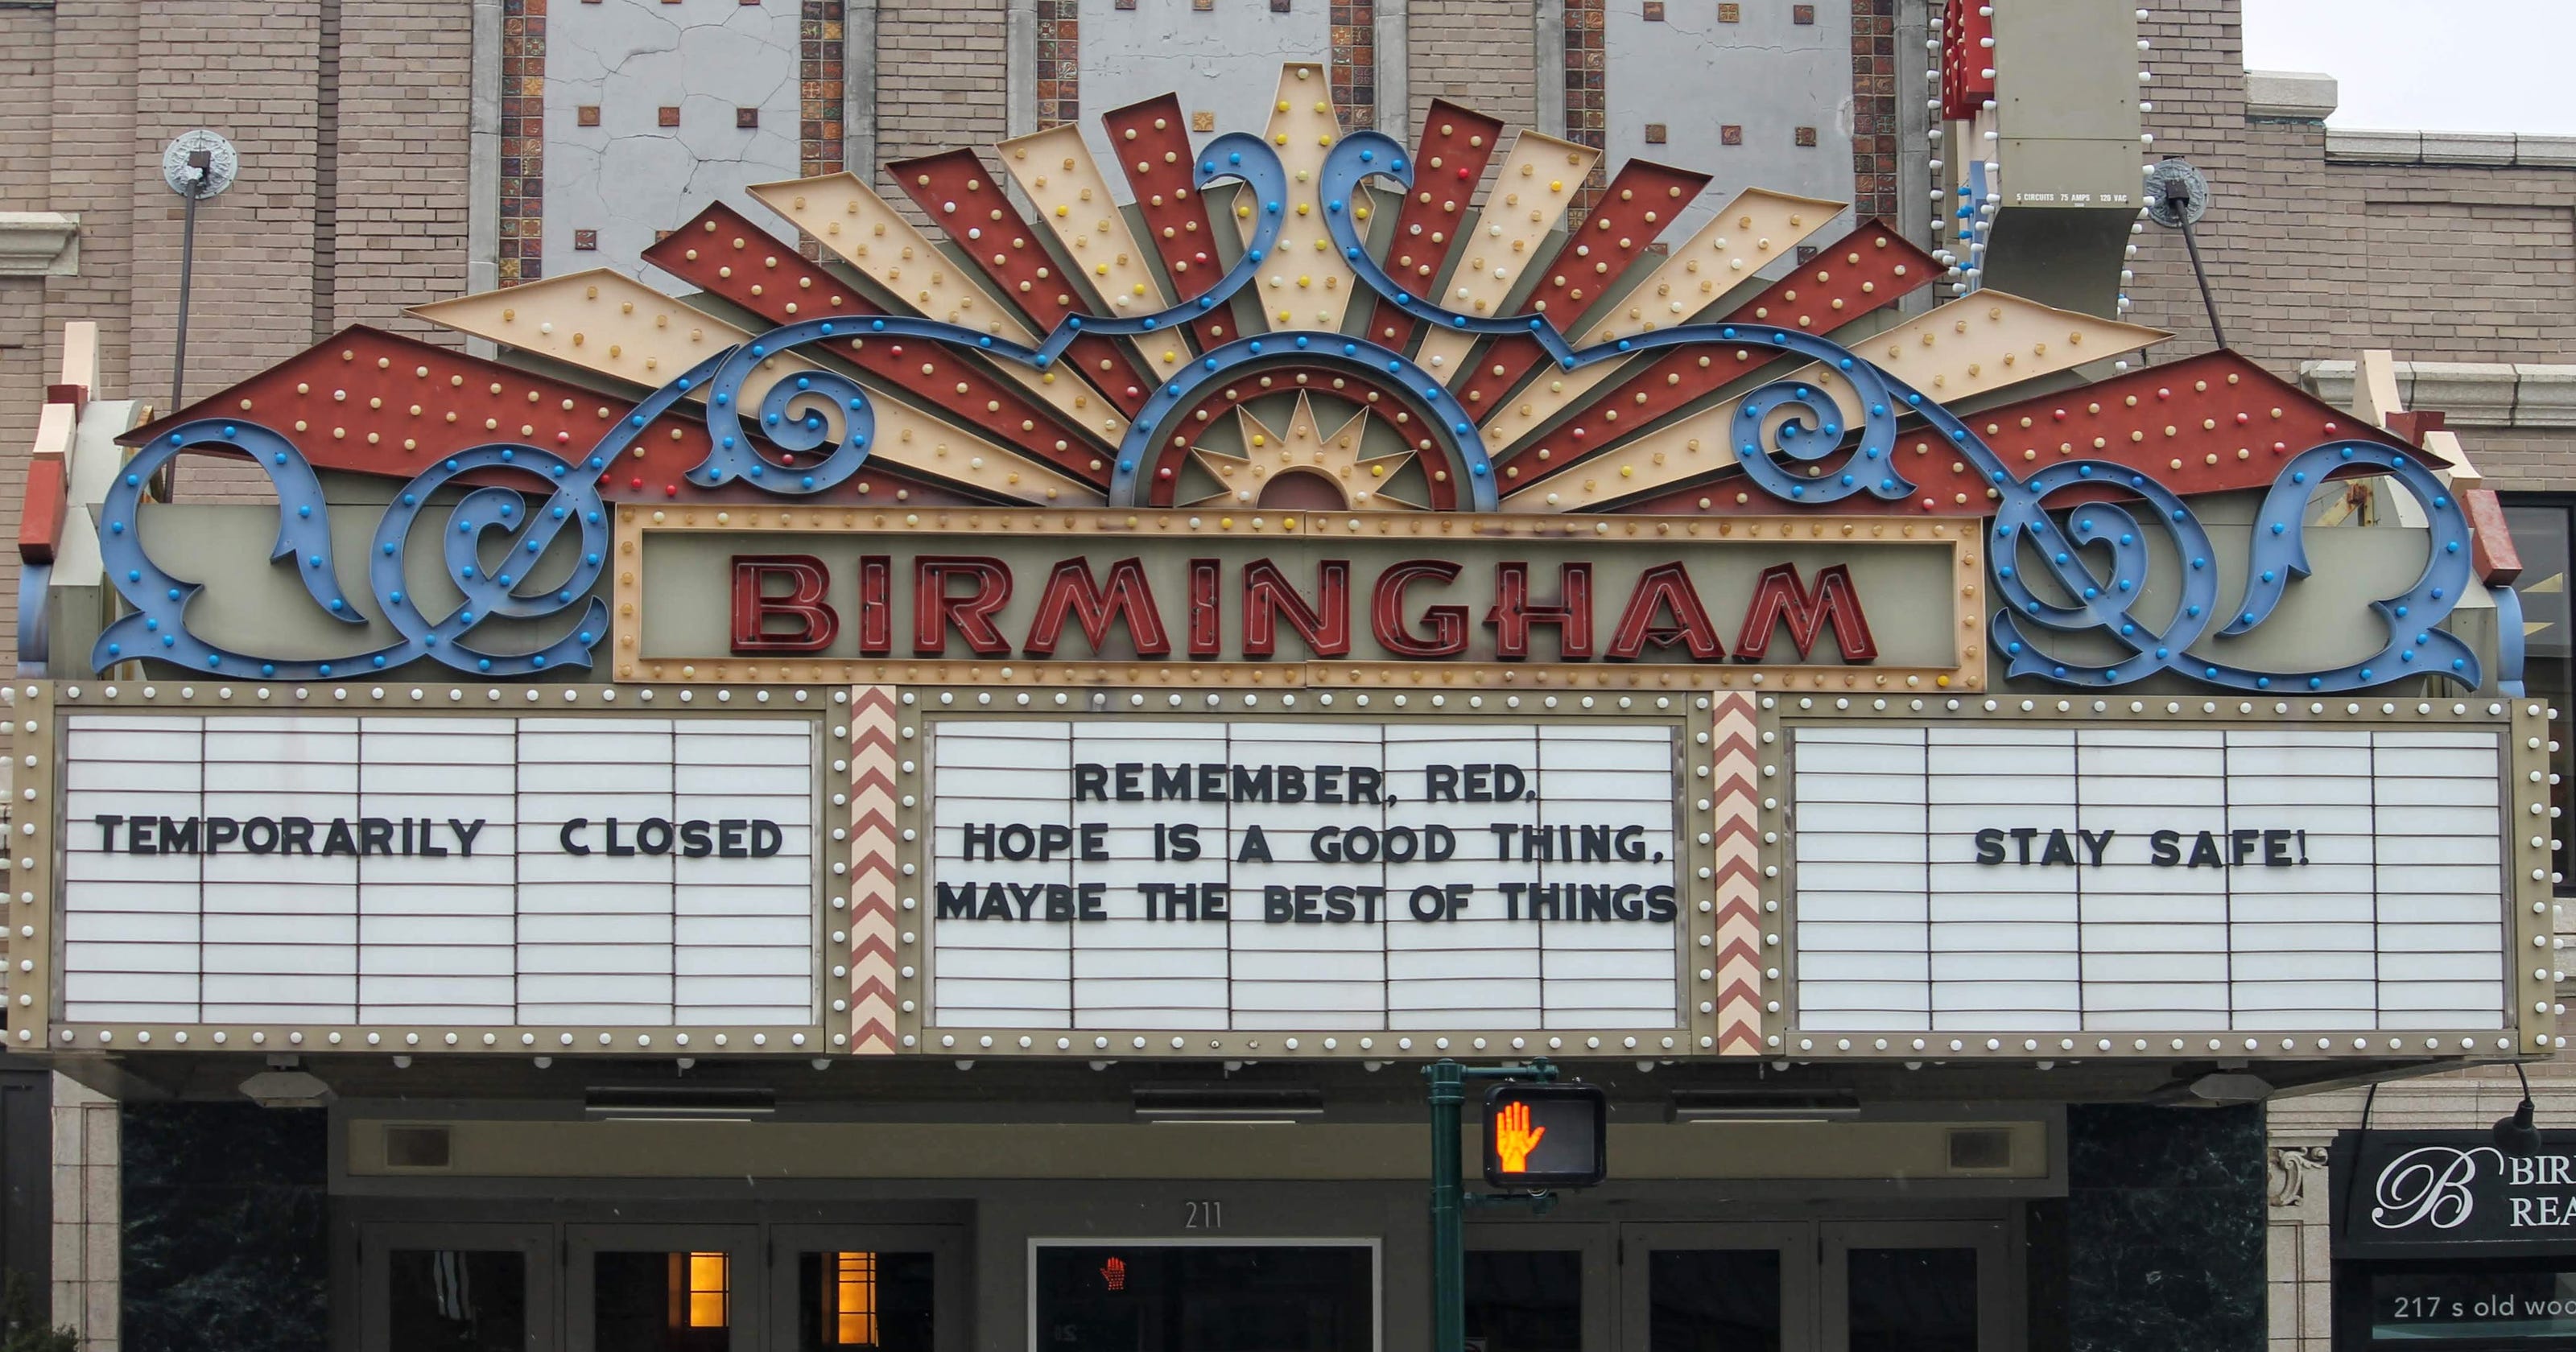 Movie theaters are cautiously optimistic about future